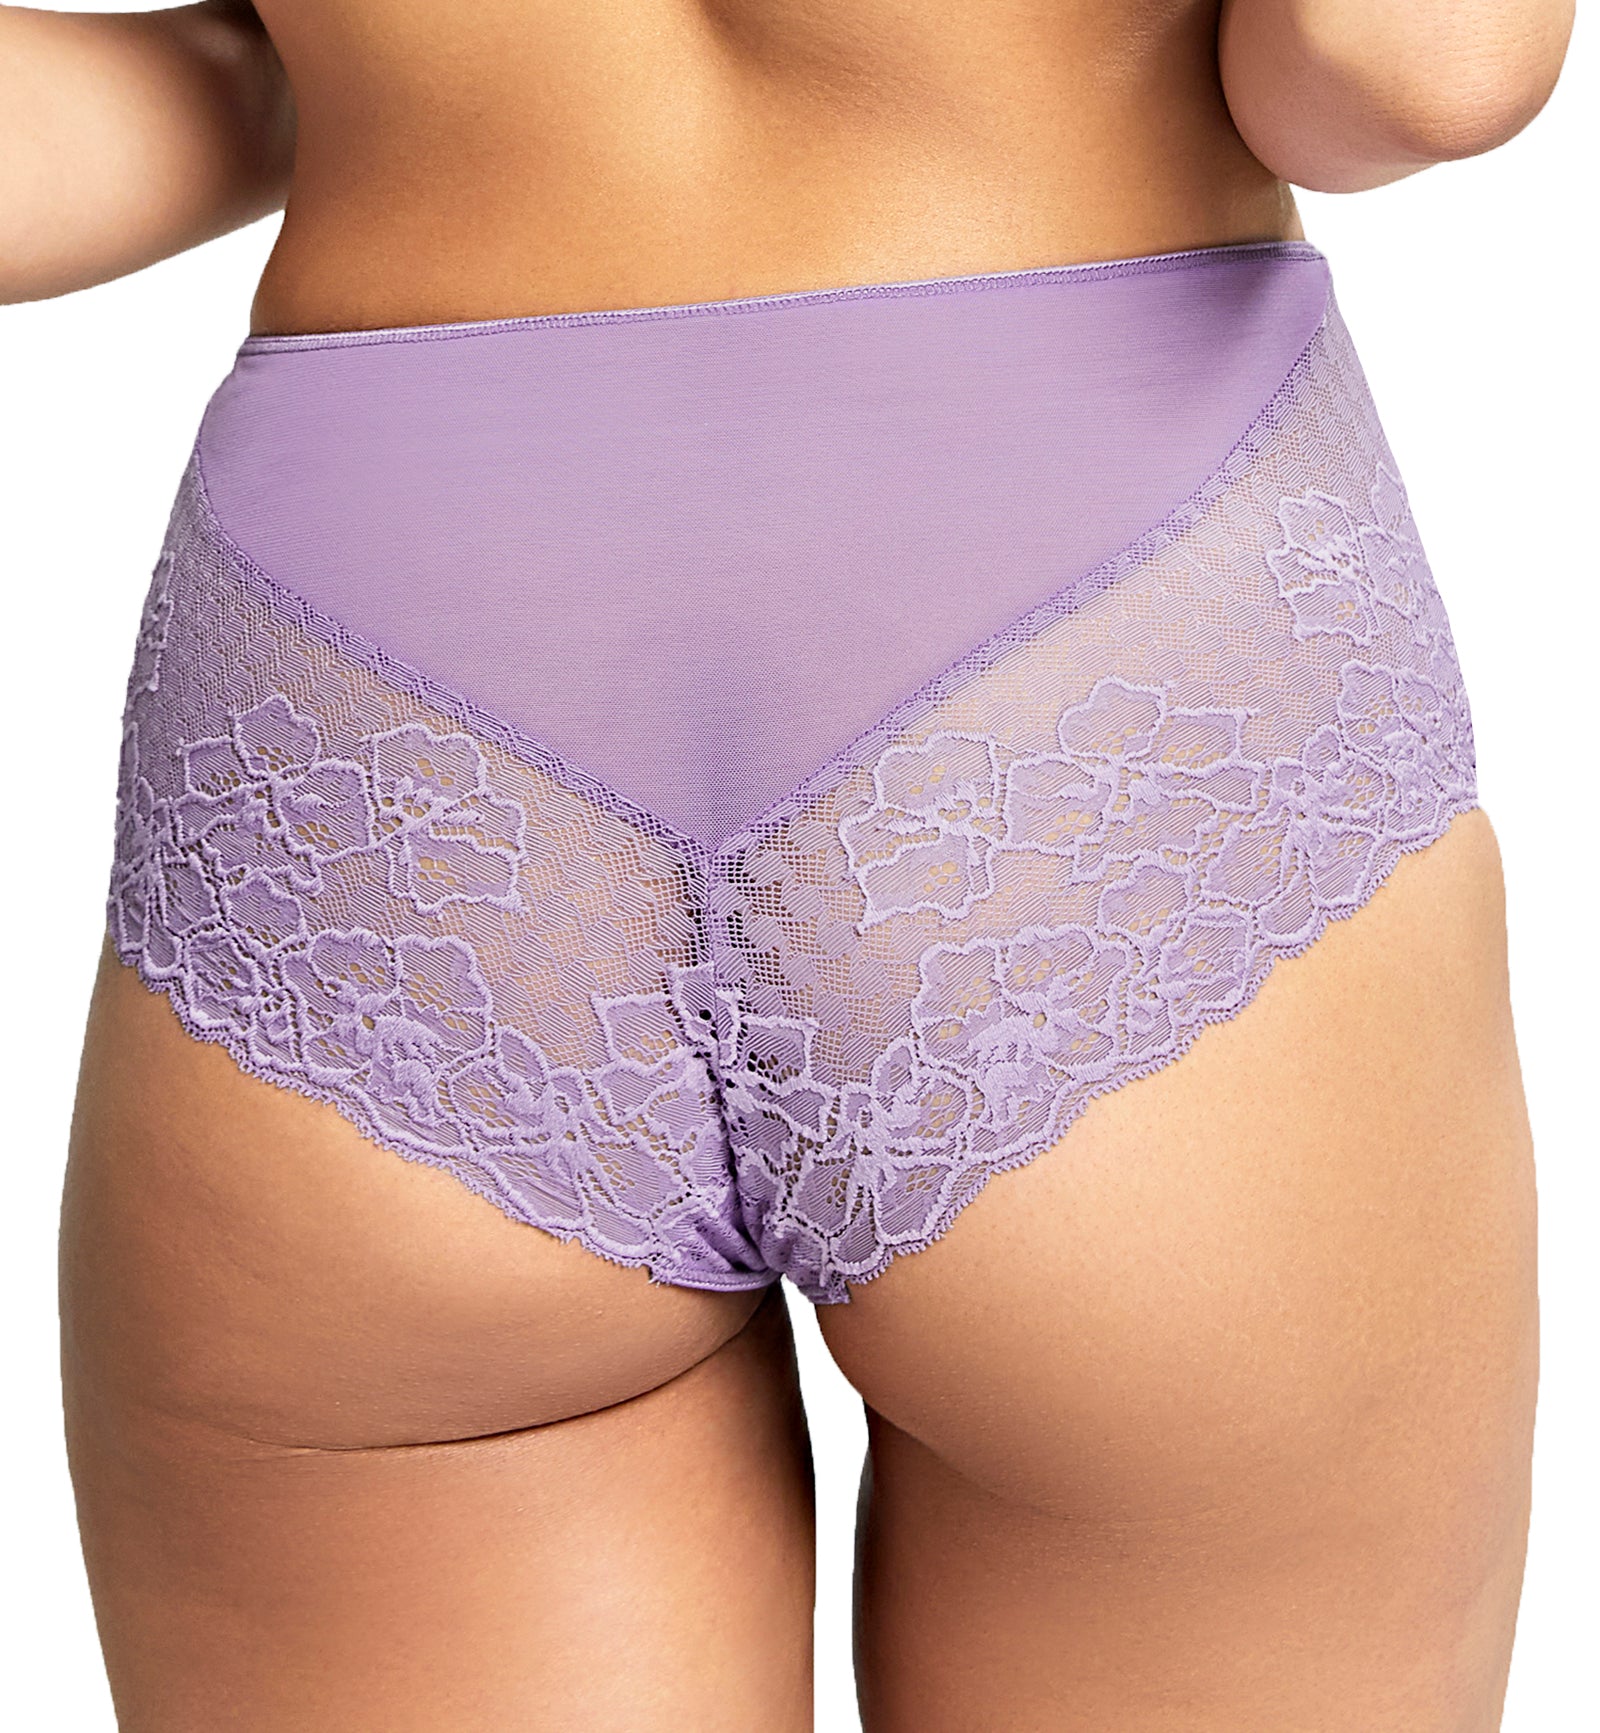 Panache Envy Matching Deep Brief (7283),Small,Violet - Violet,Small